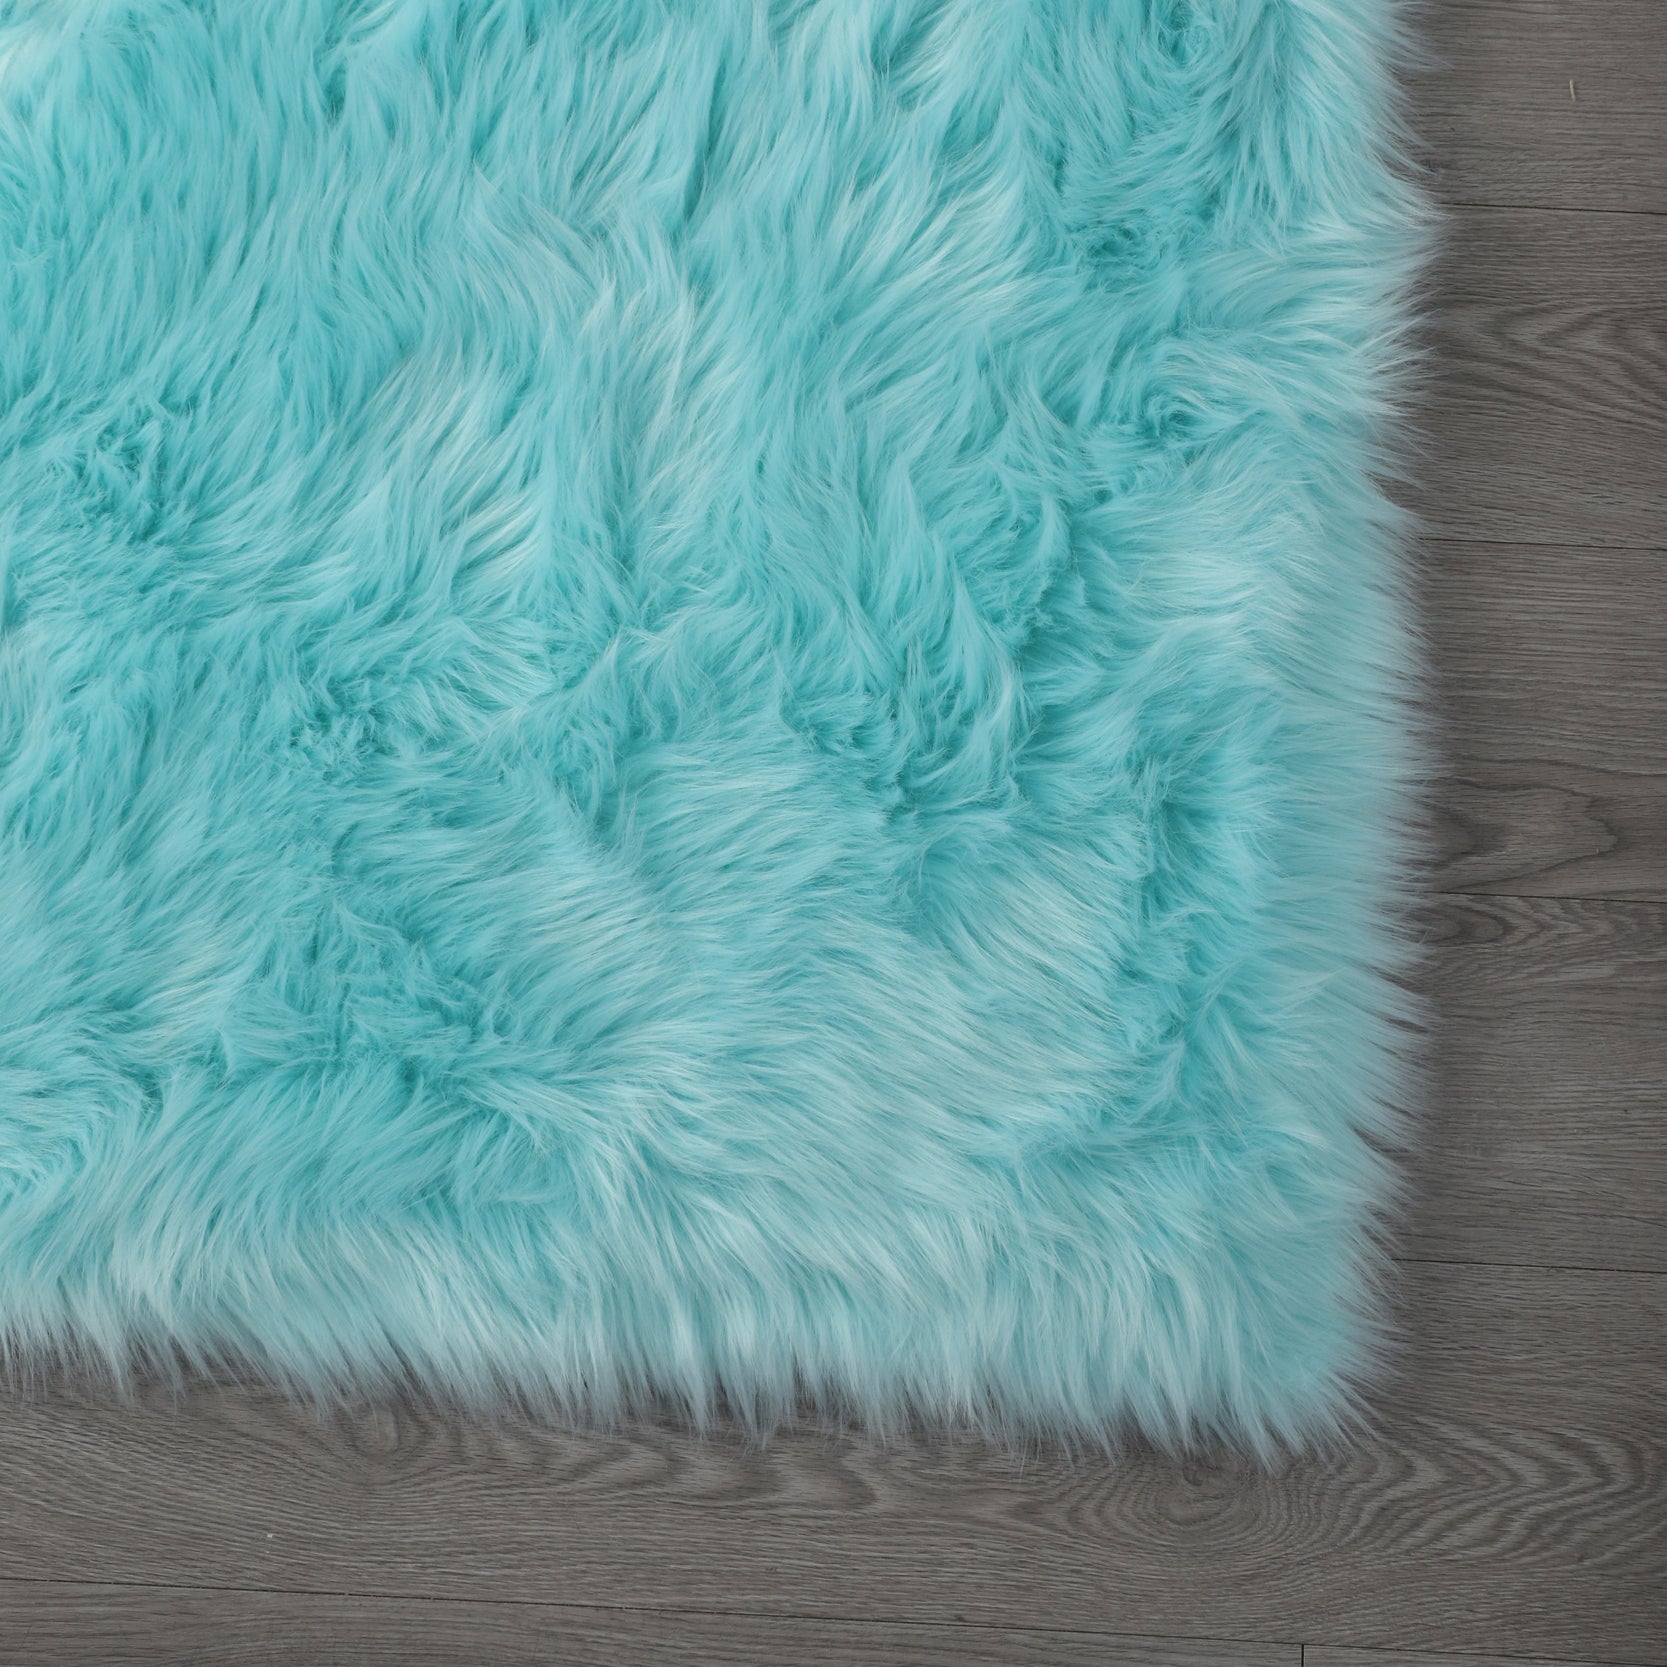 7' x 5' Cozy Collection Ultra Soft Fluffy Faux Fur Sheepskin Area Rug (Teal)